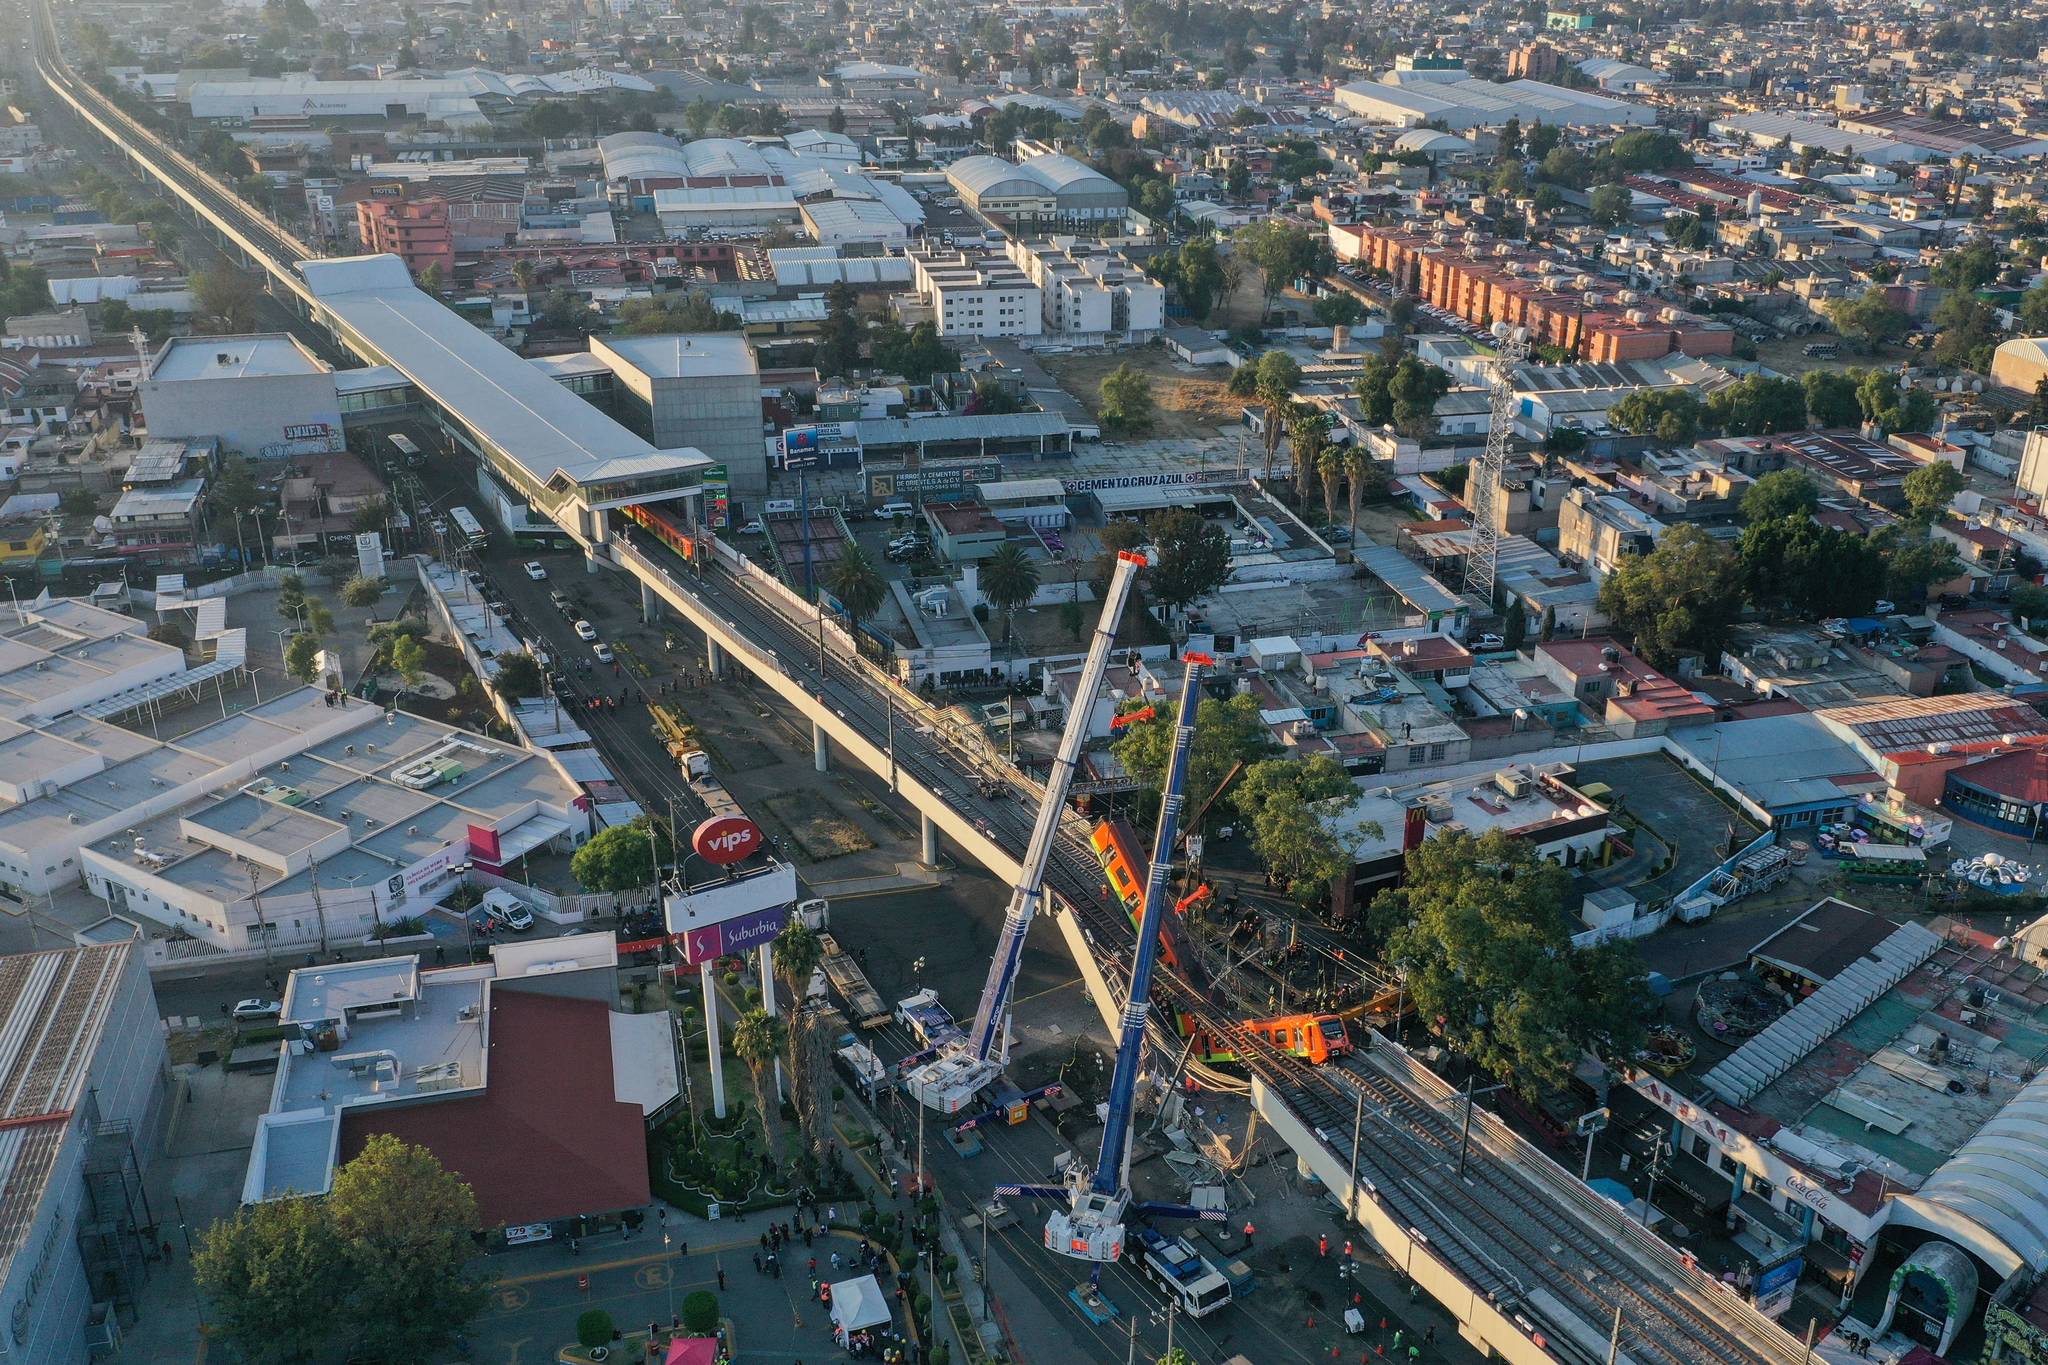 Pedro Pardo / AFP via Getty Images 
An aerial view shows the site of a metro train accident after an overpass for a metro partially collapsed in Mexico City. An elevated metro line collapsed in the Mexican capital on Monday, leaving at least 23 people dead and dozens injured as a train came plunging down, authorities said.